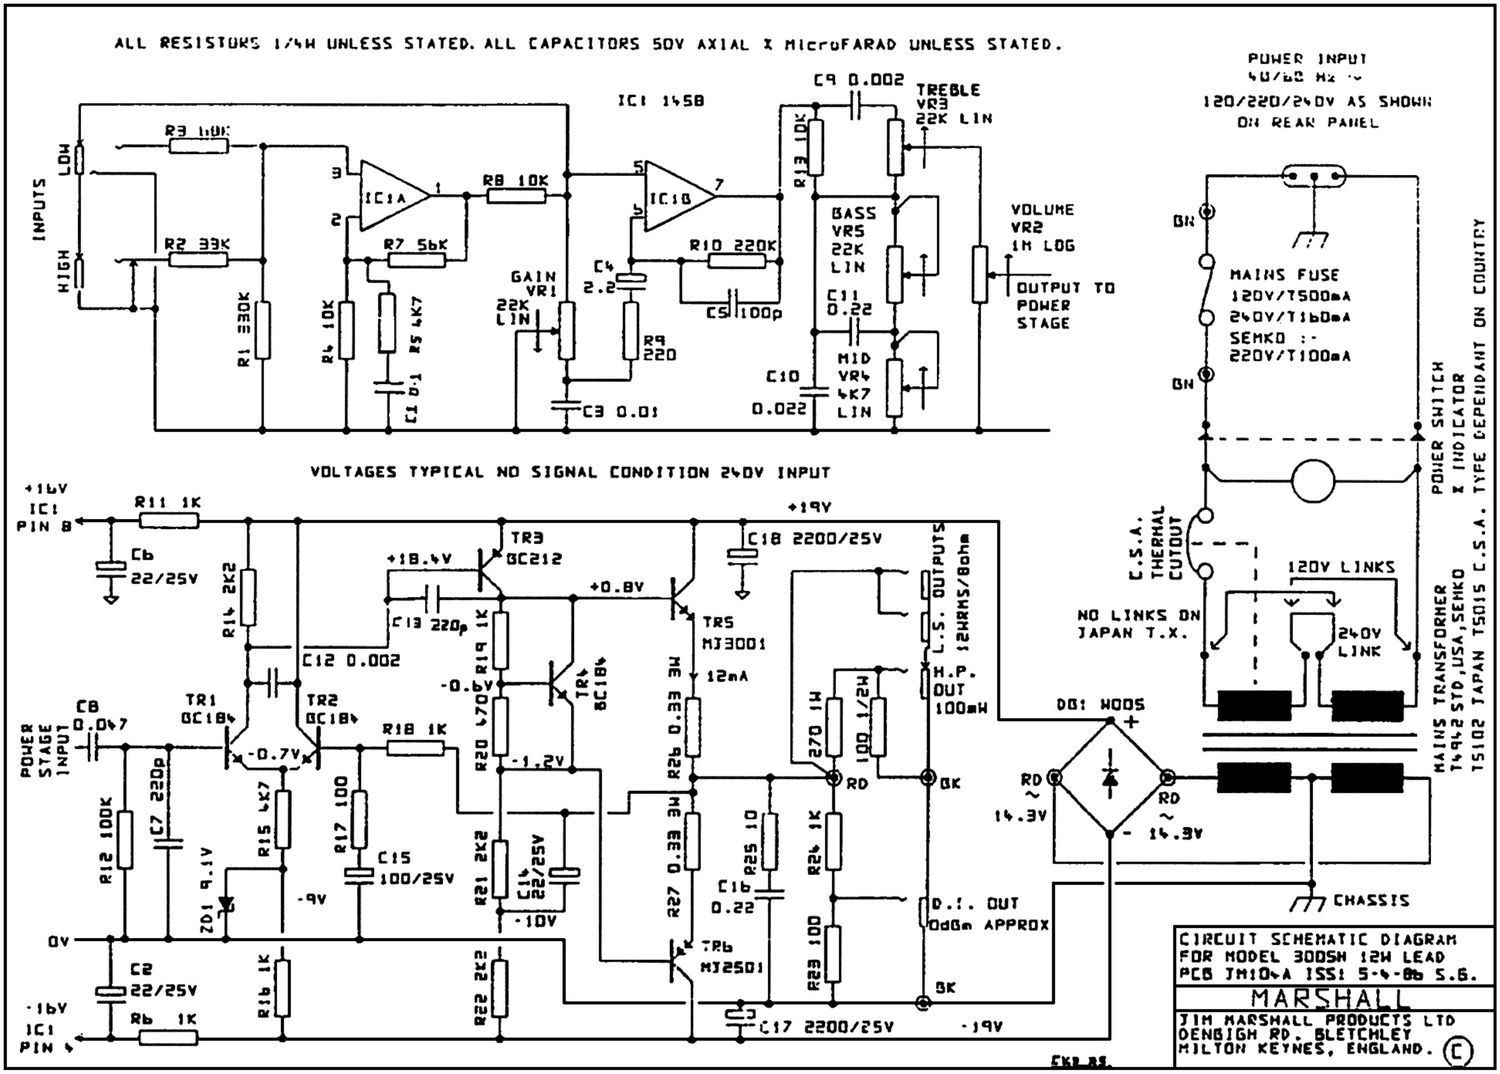 Marshall 3005H 12W Lead Schematic